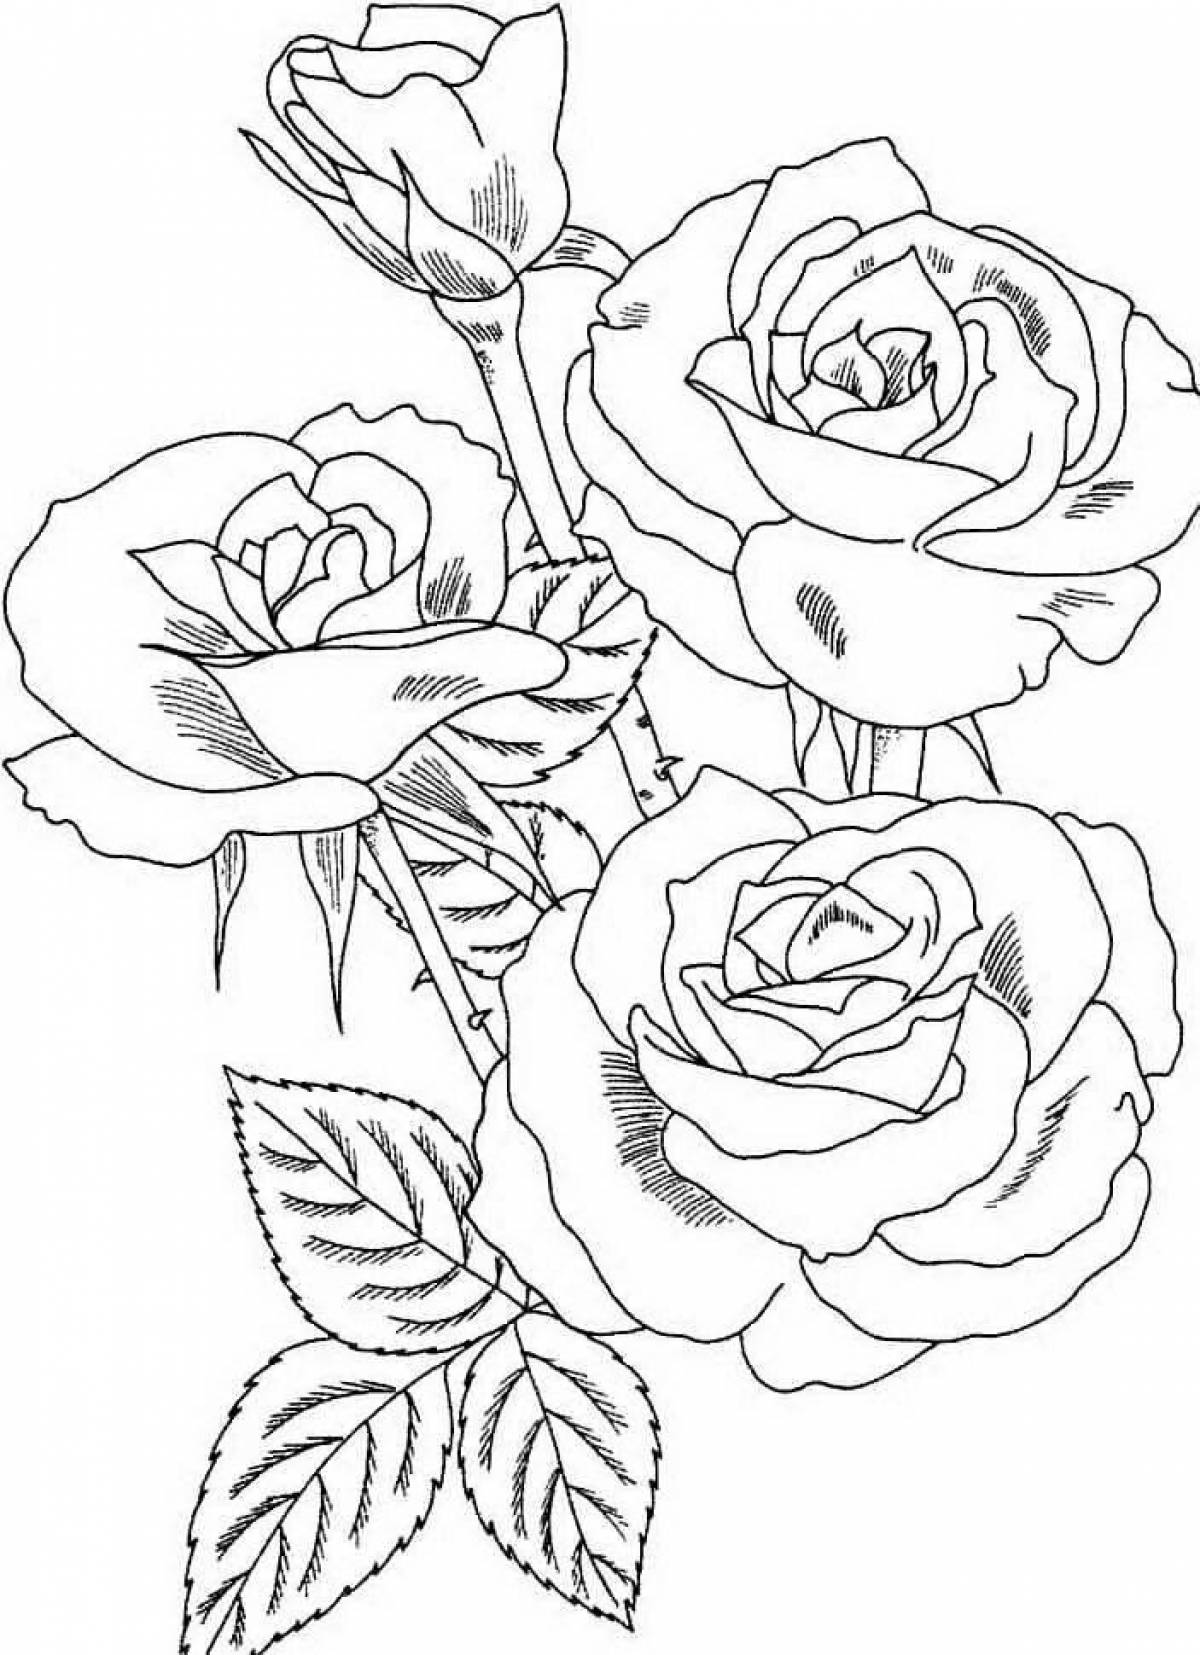 Tempting coloring picture of a rose